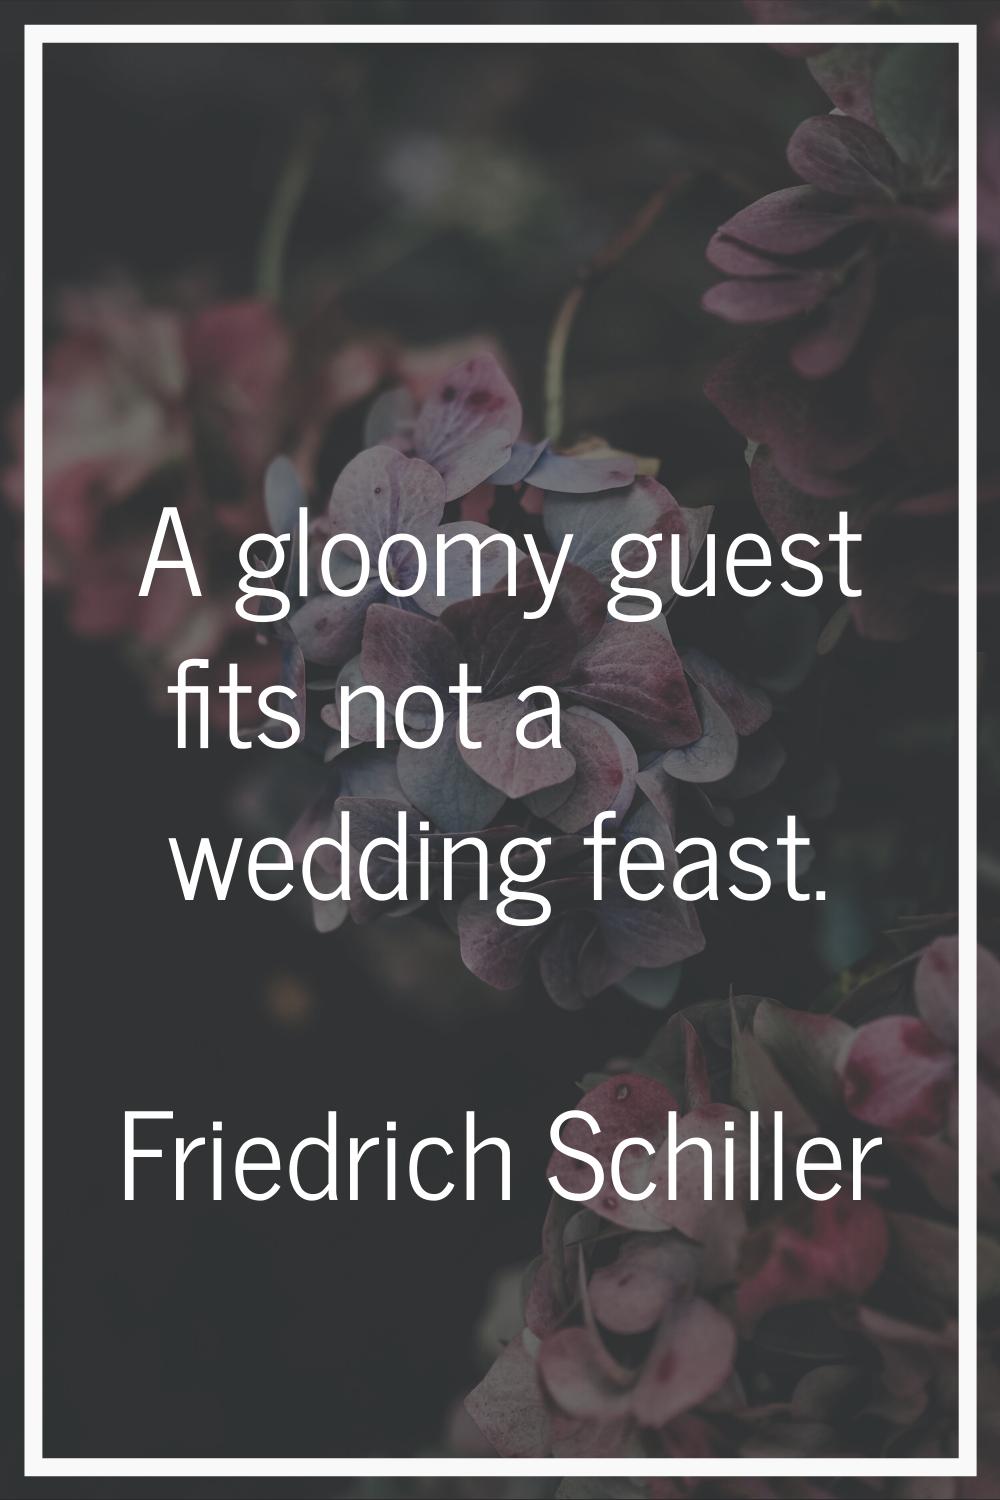 A gloomy guest fits not a wedding feast.